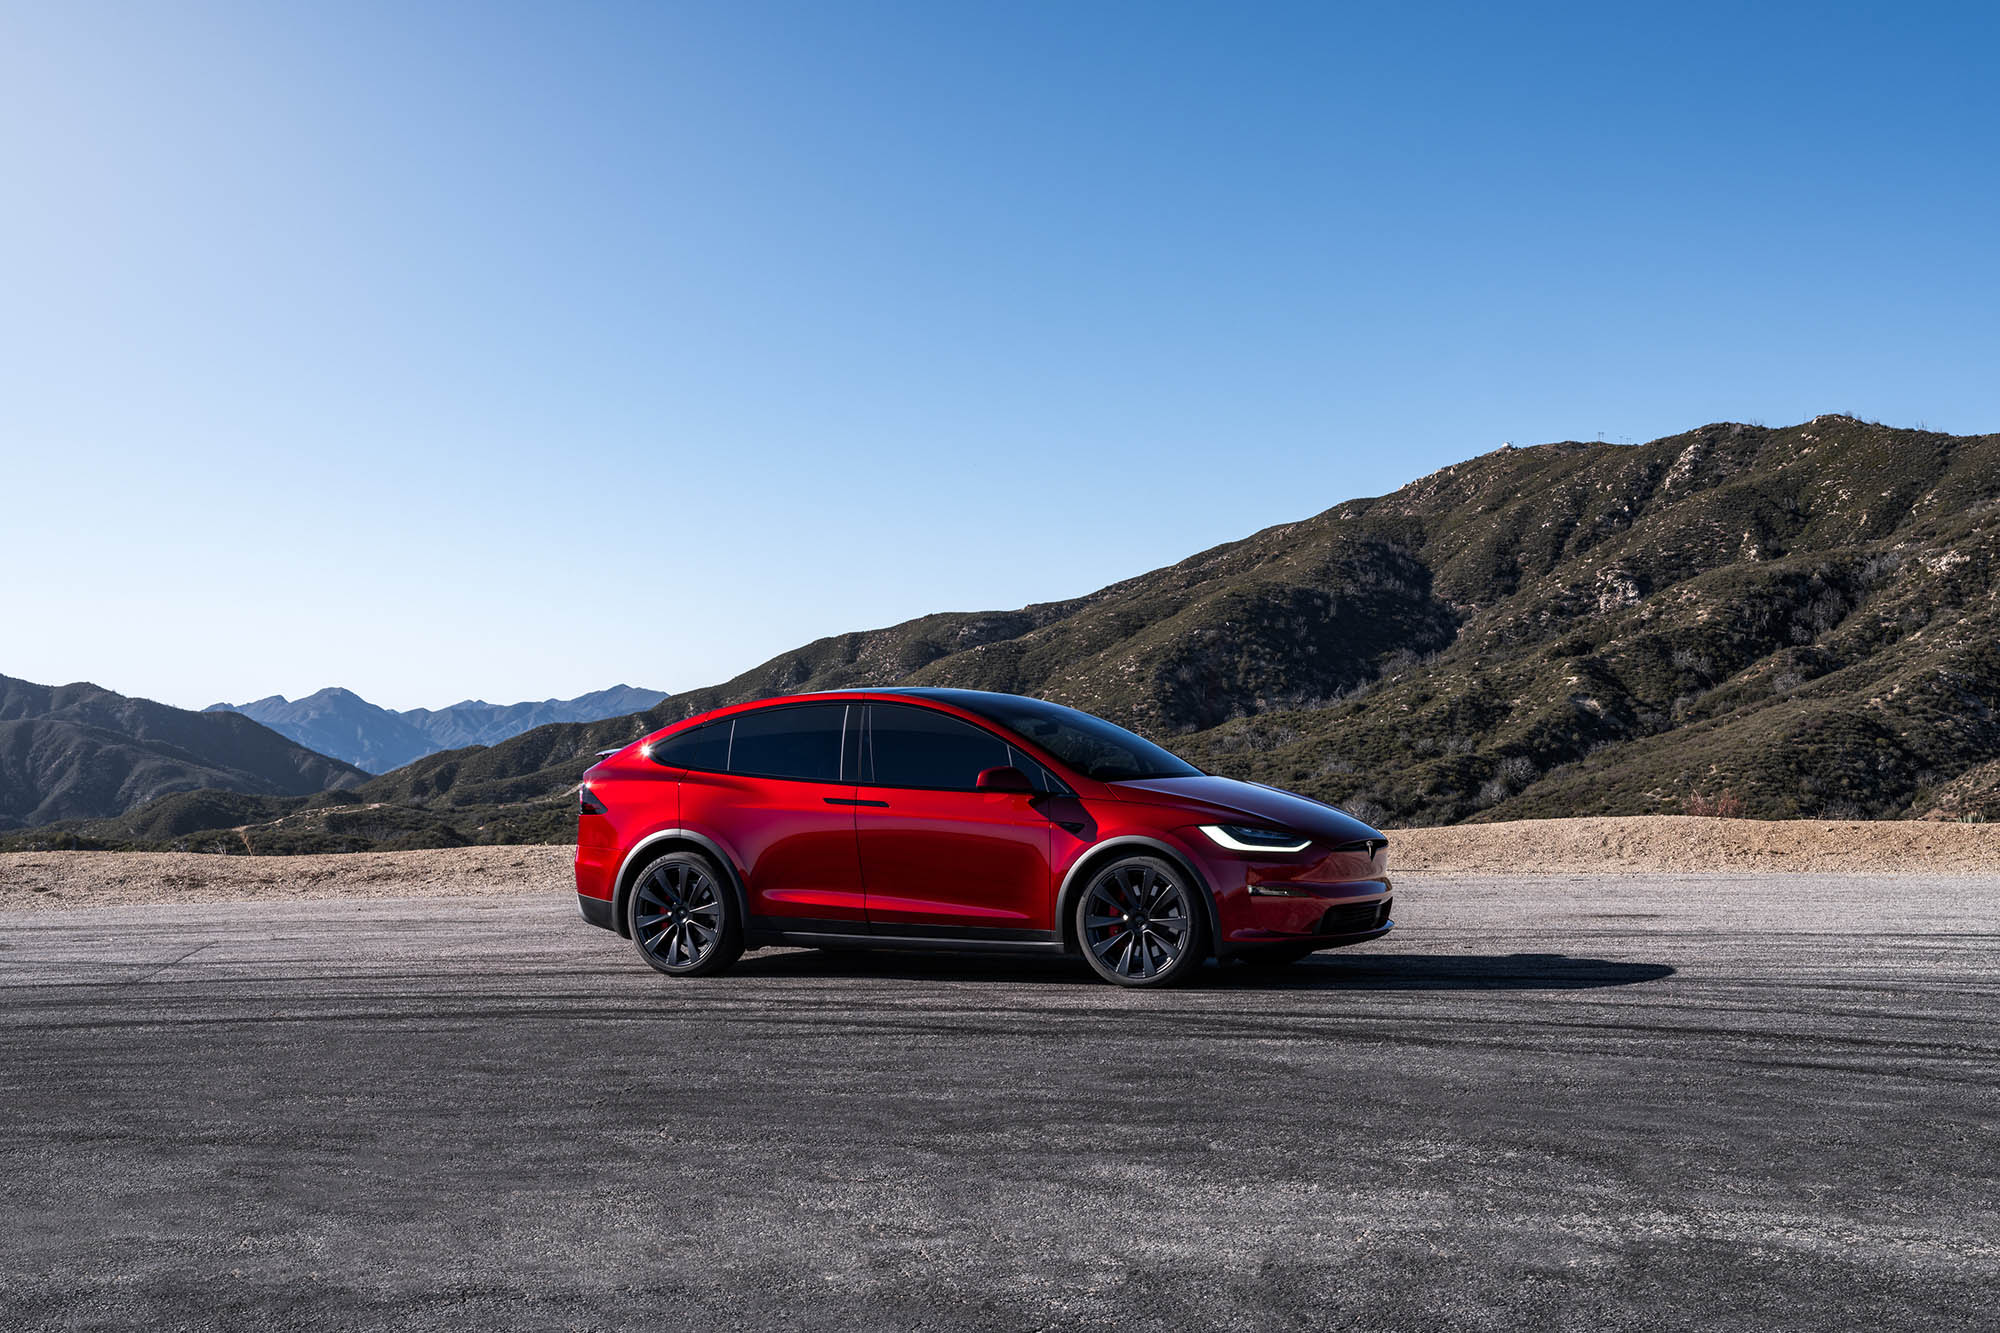 Red Tesla Model X parked in a mountainous area.